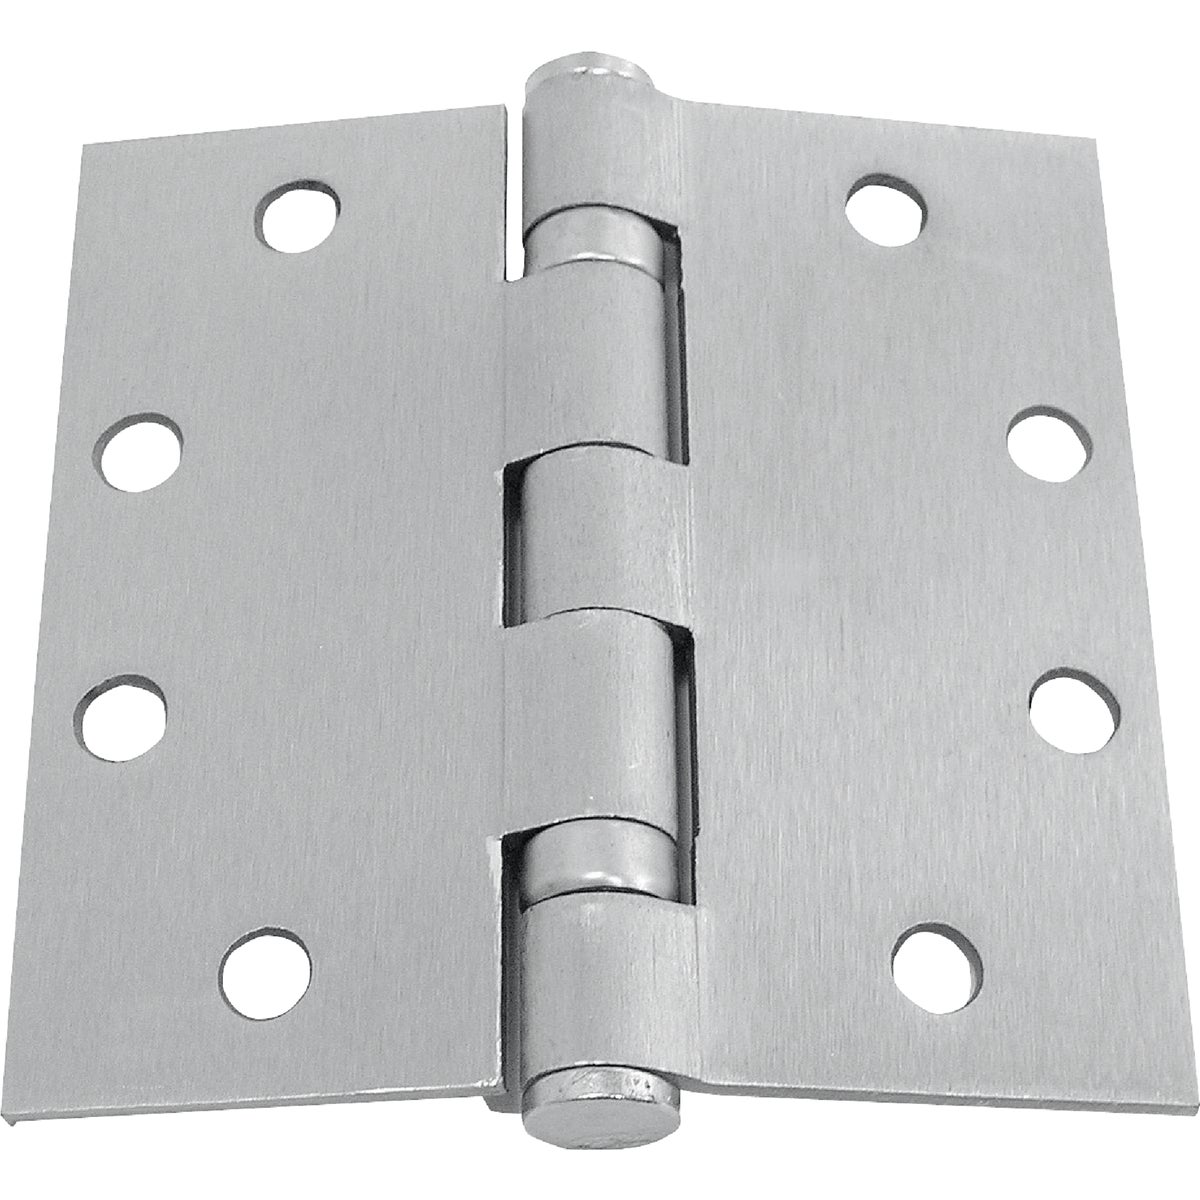 Item 236918, Heavy duty commercial square ball bearing hinge with square corners is made